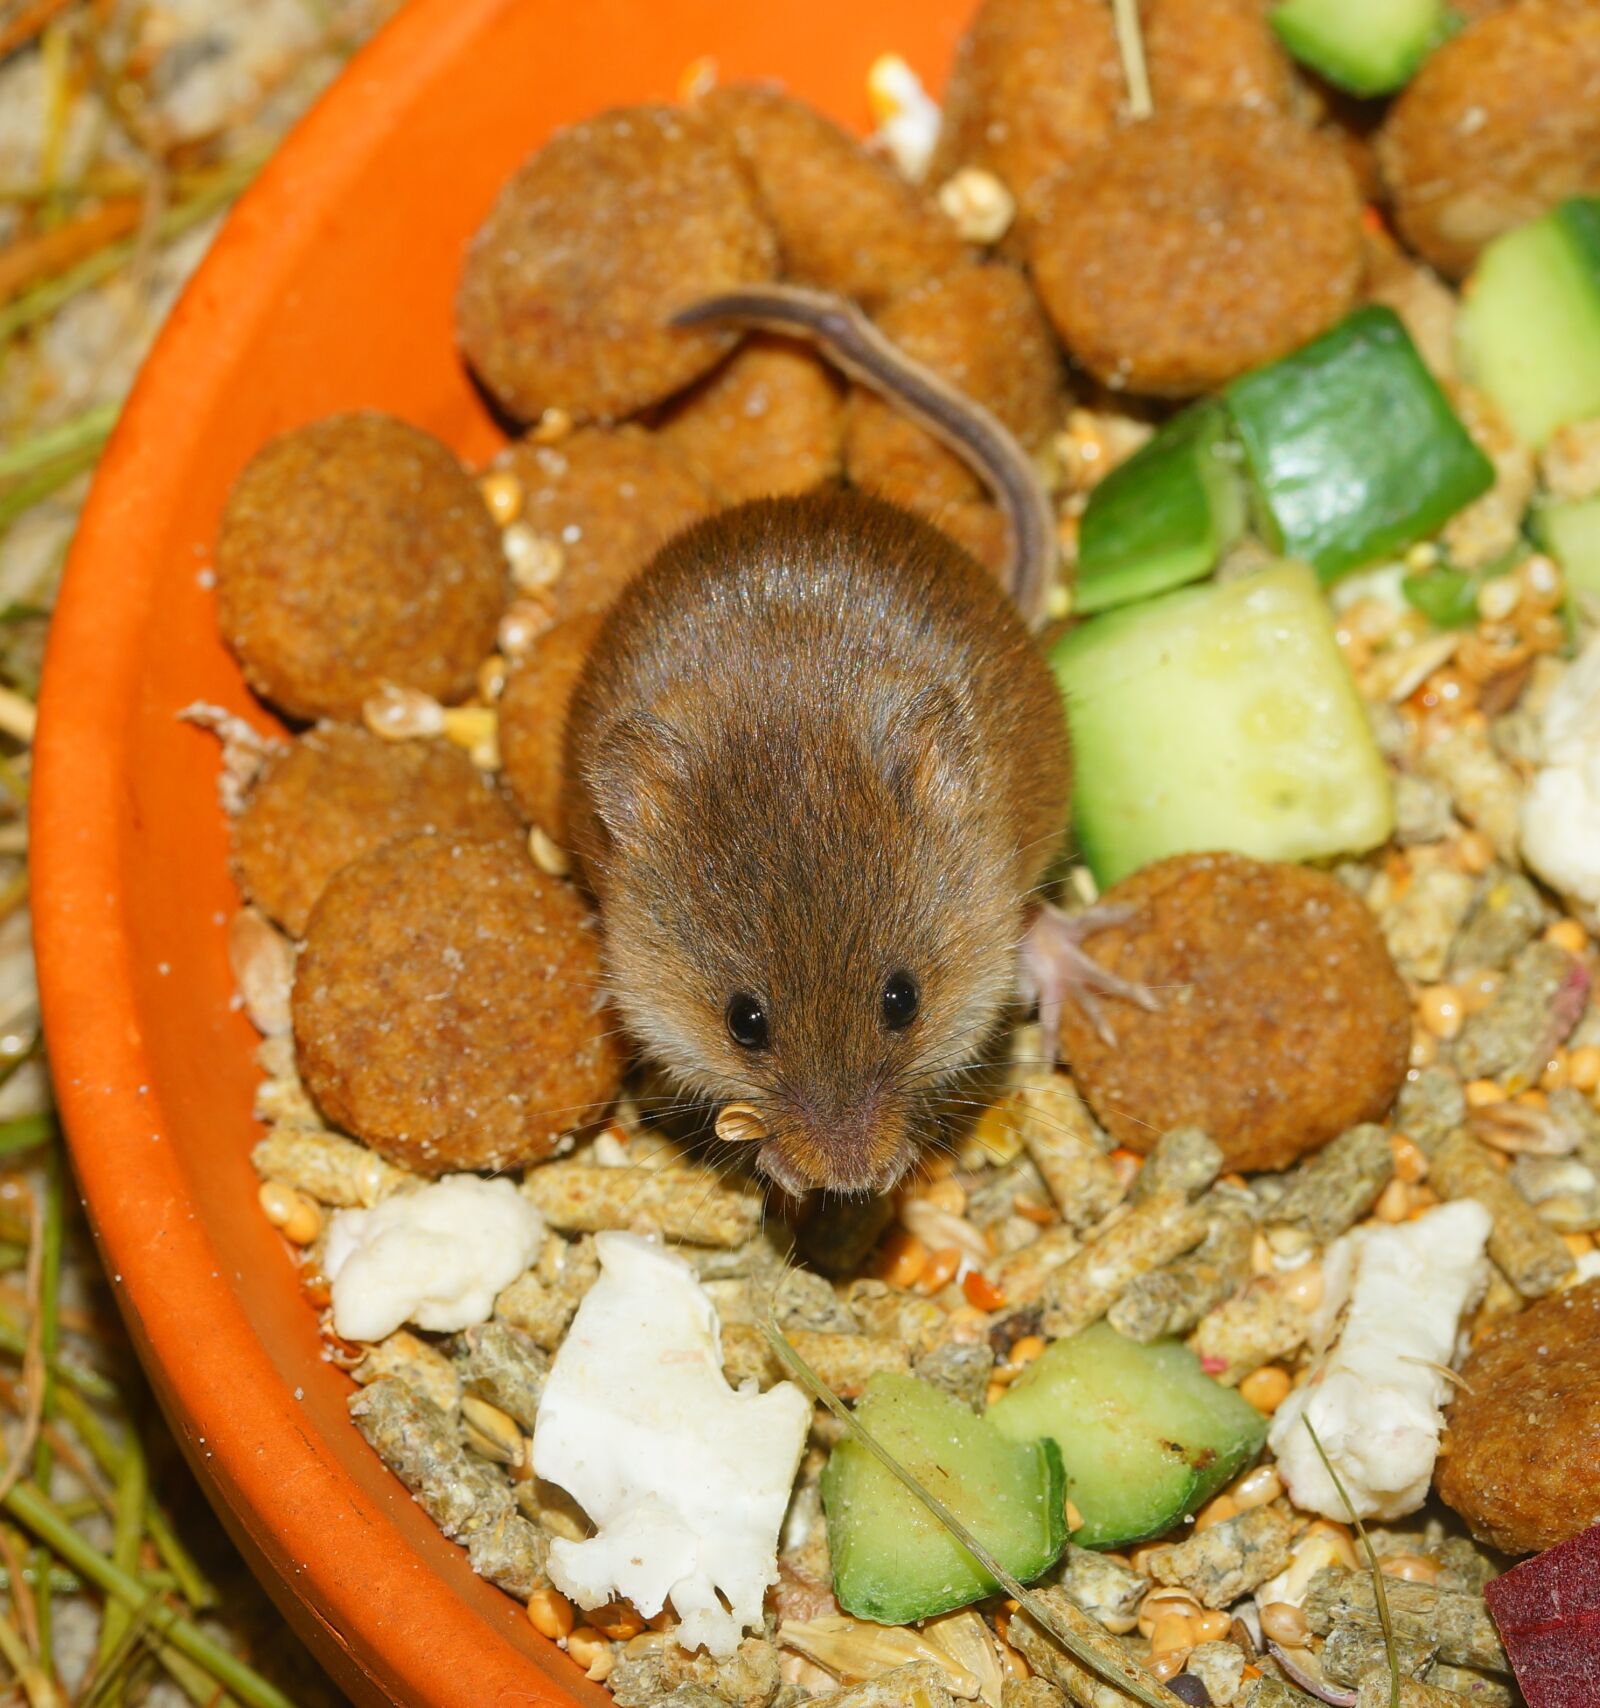 Sony a99 II + 105mm F2.8 sample photo. Dwarf mouse, cute, food photography